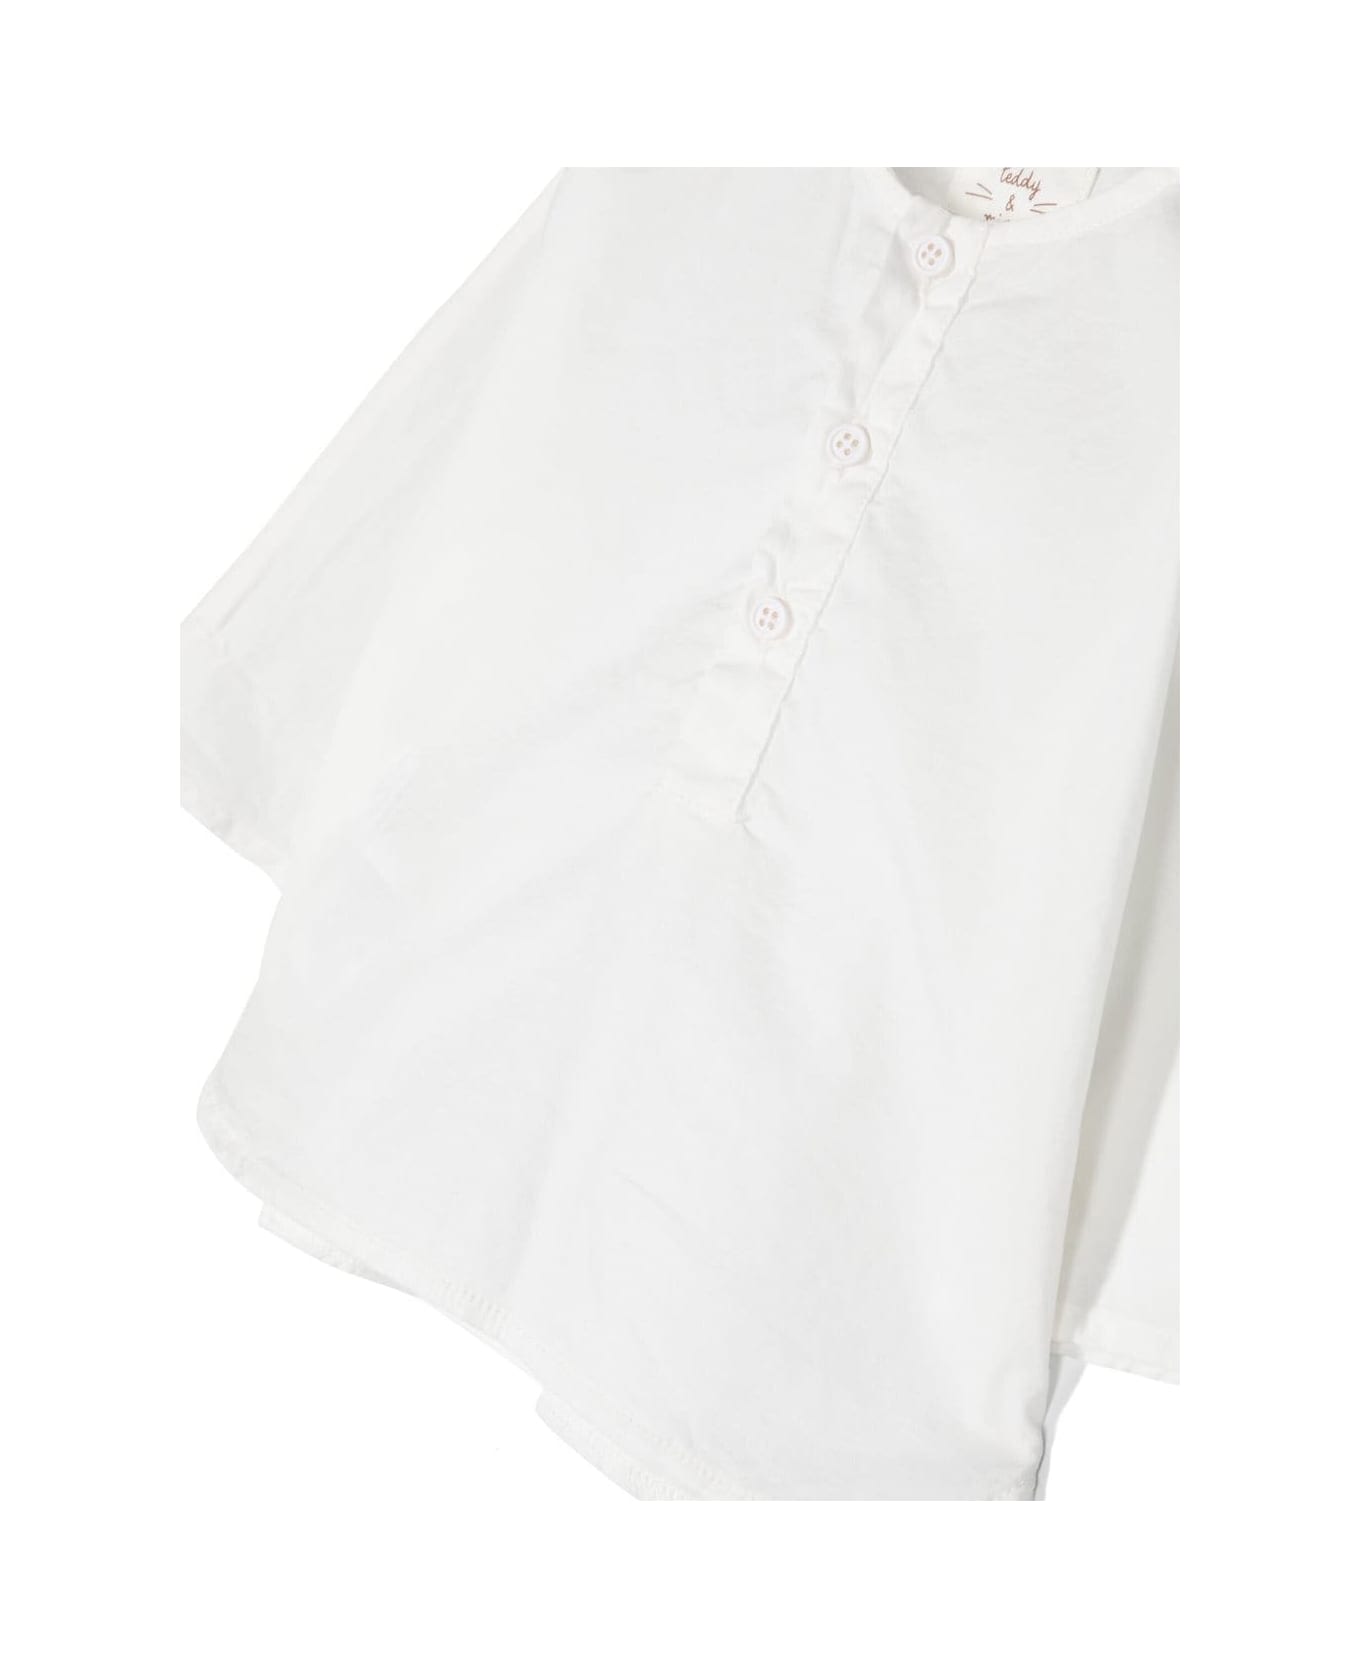 Teddy & Minou Shirt With Cropped Sleeves - White シャツ